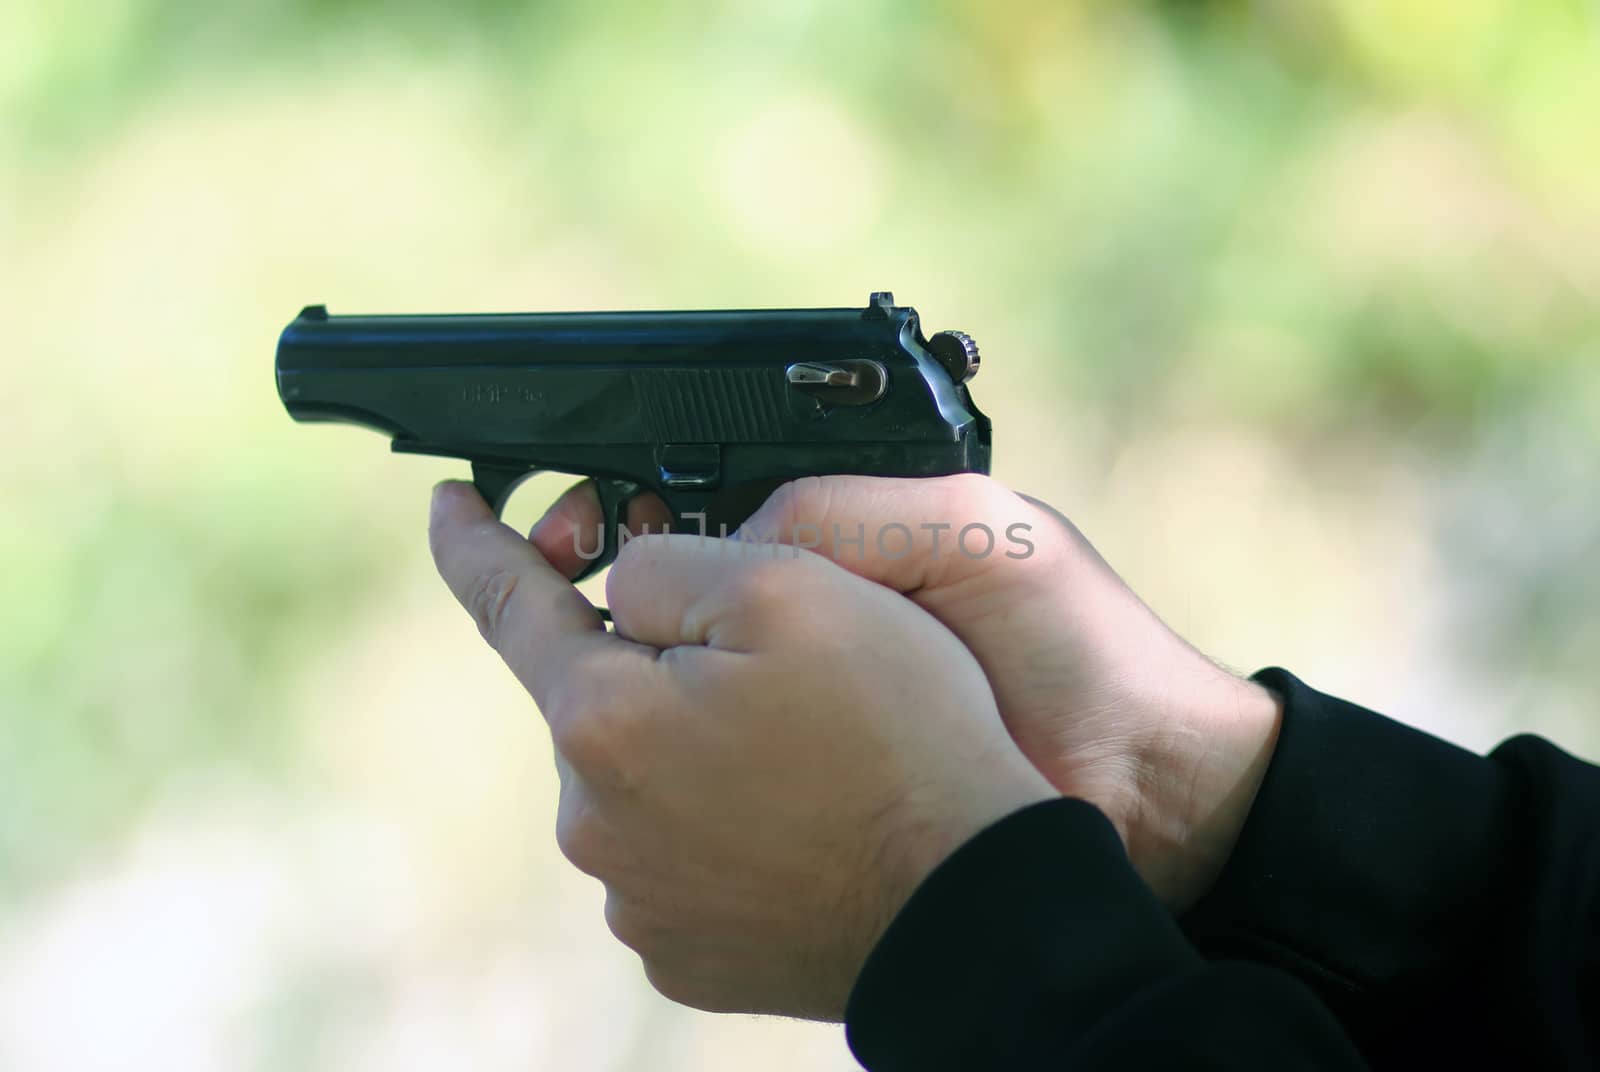 Shooting with the Makarov pistol with two hands